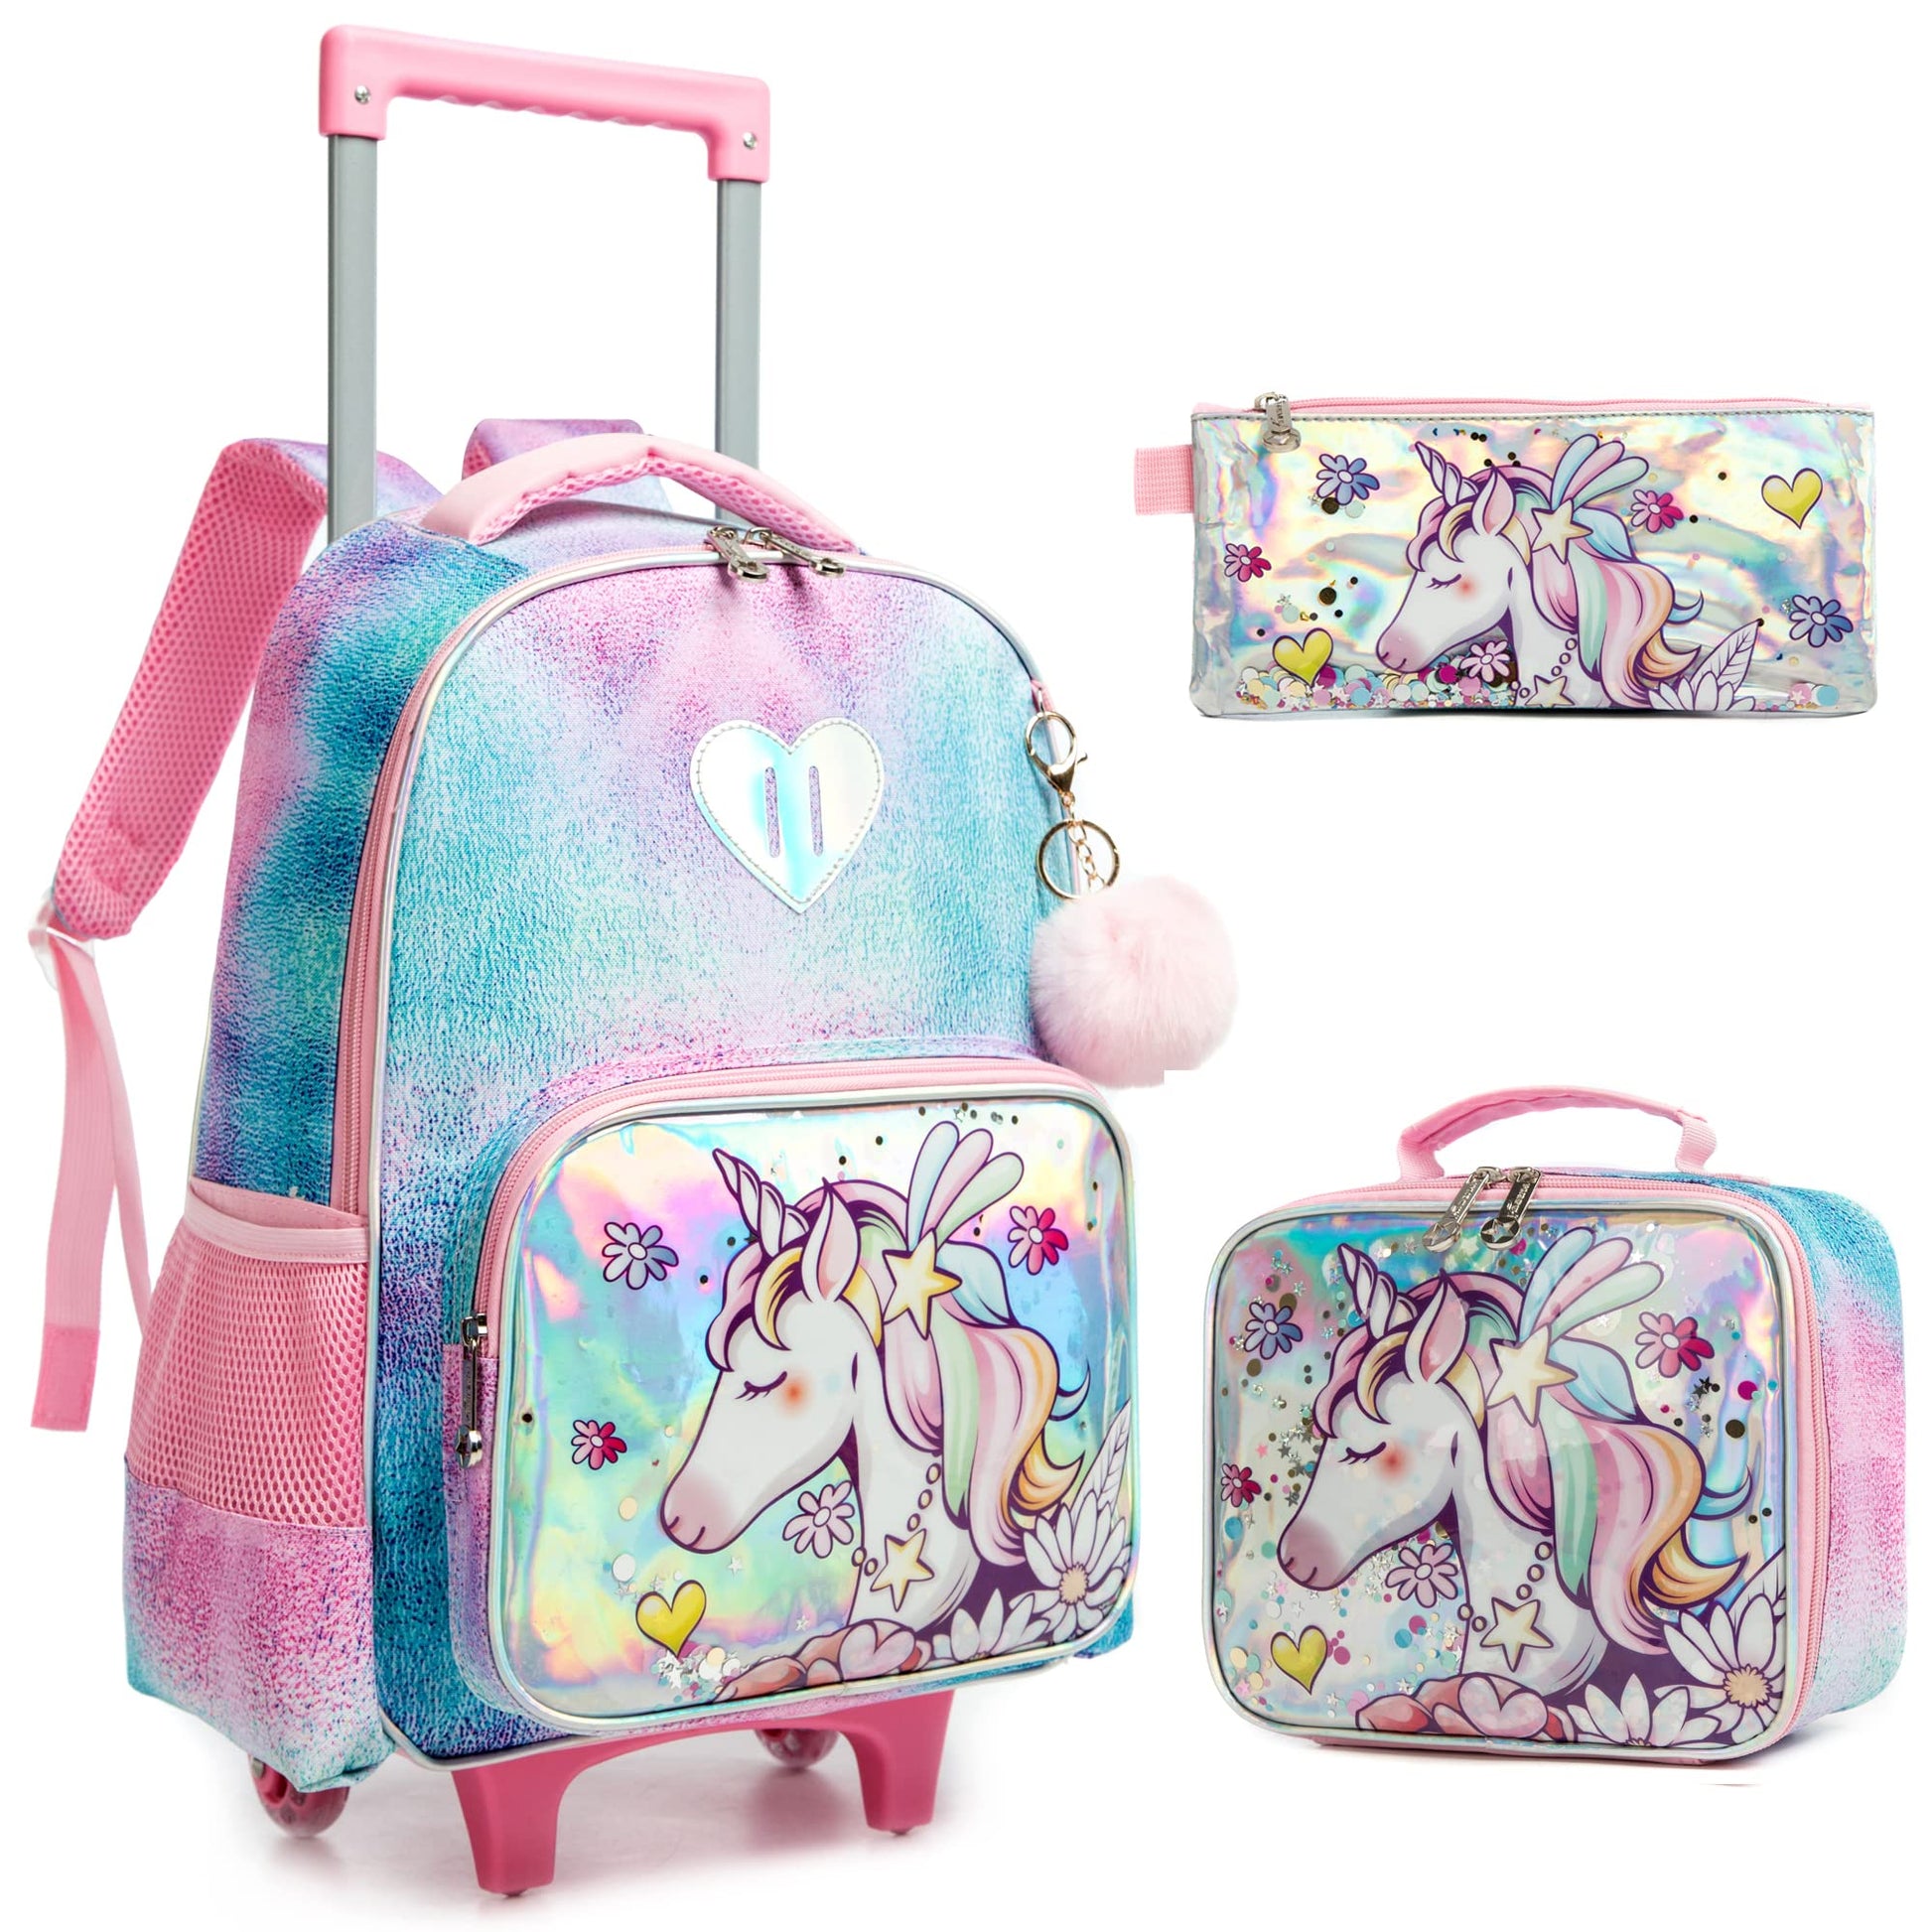 MOHCO Rolling Backpack Cute 16 inch Set 3 in 1 with Lunch Bag and Pencil Case for Girls